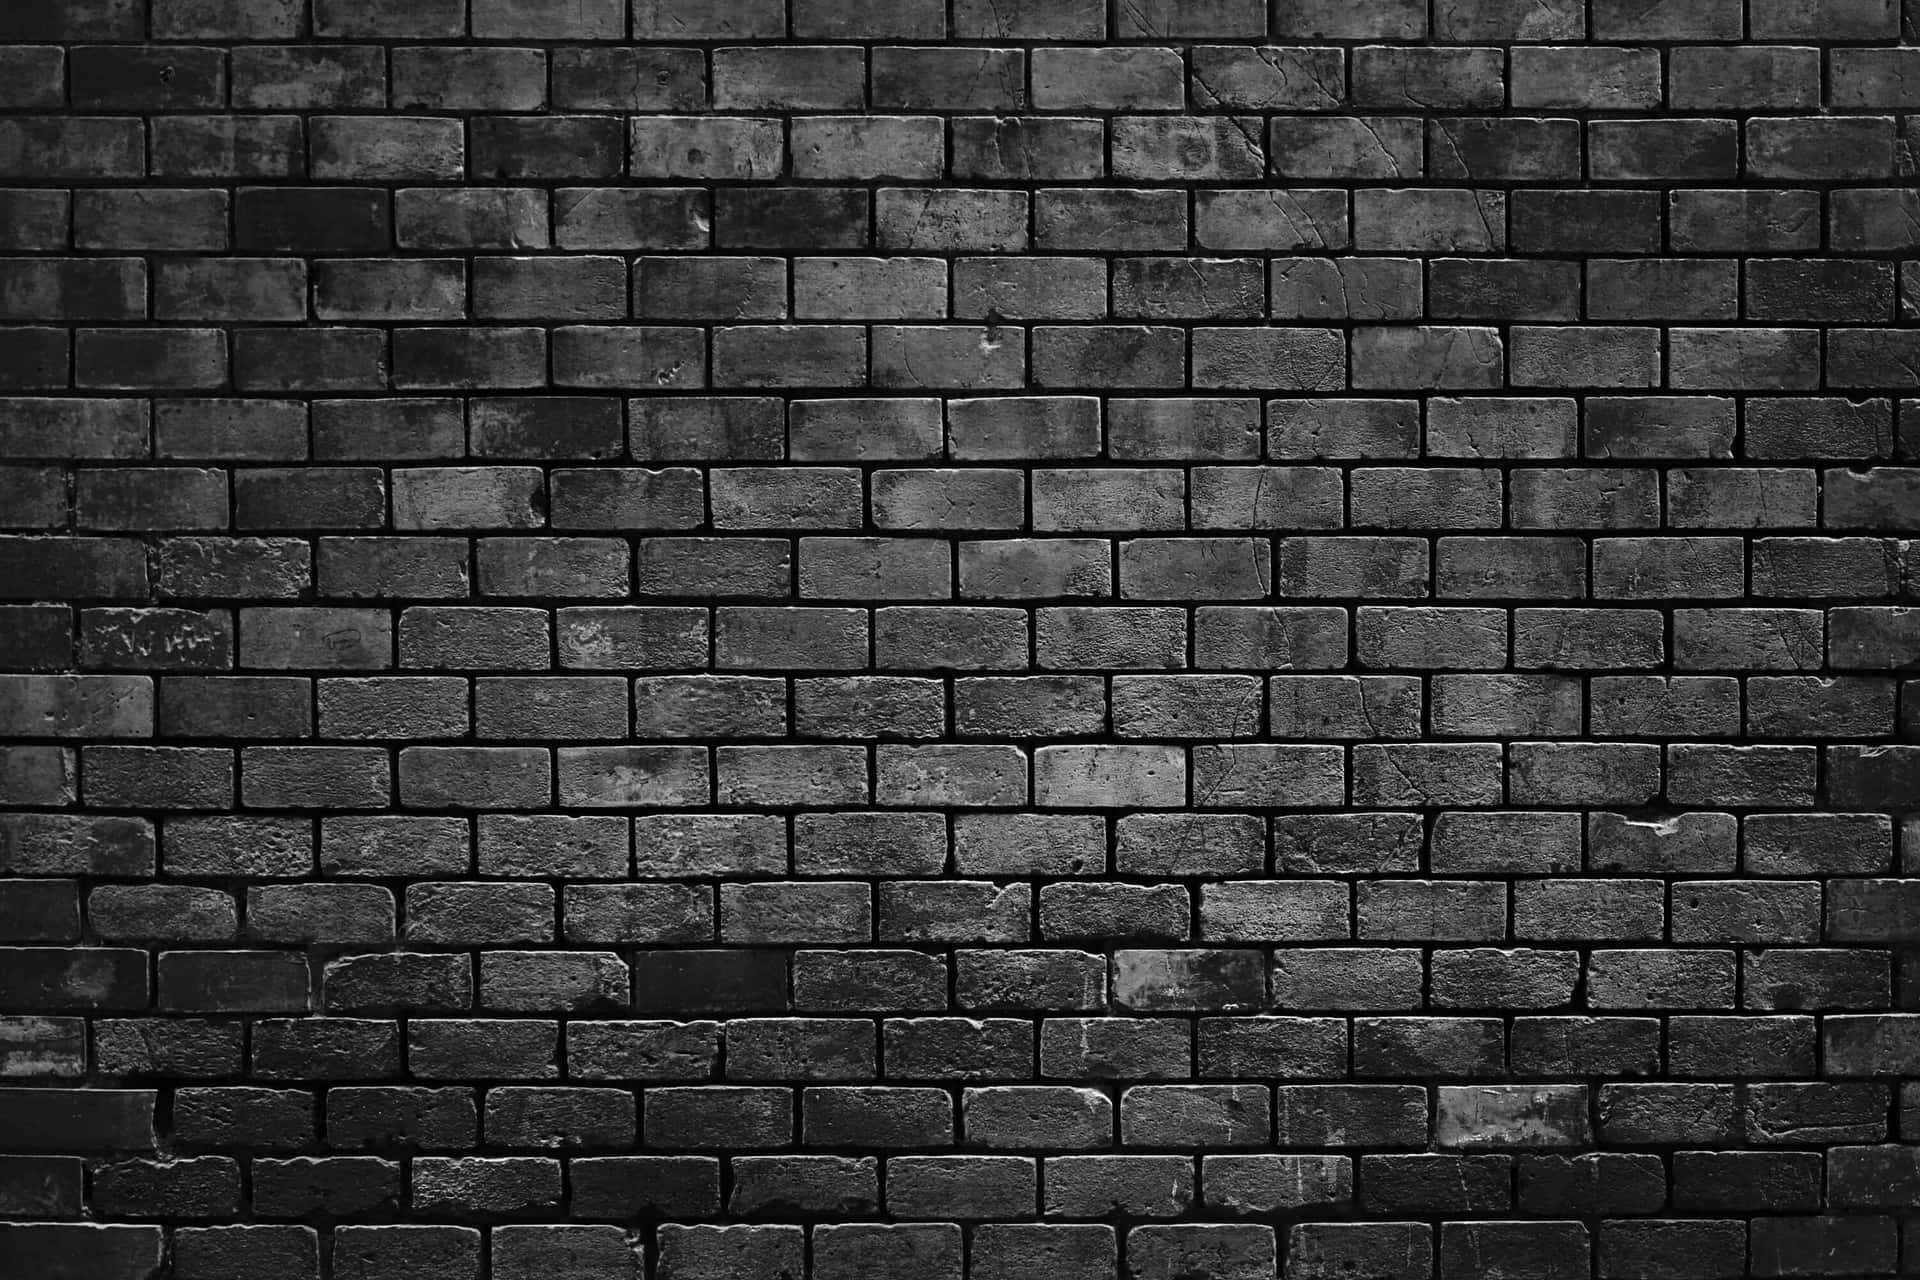 Black brick texture as a wall or room background